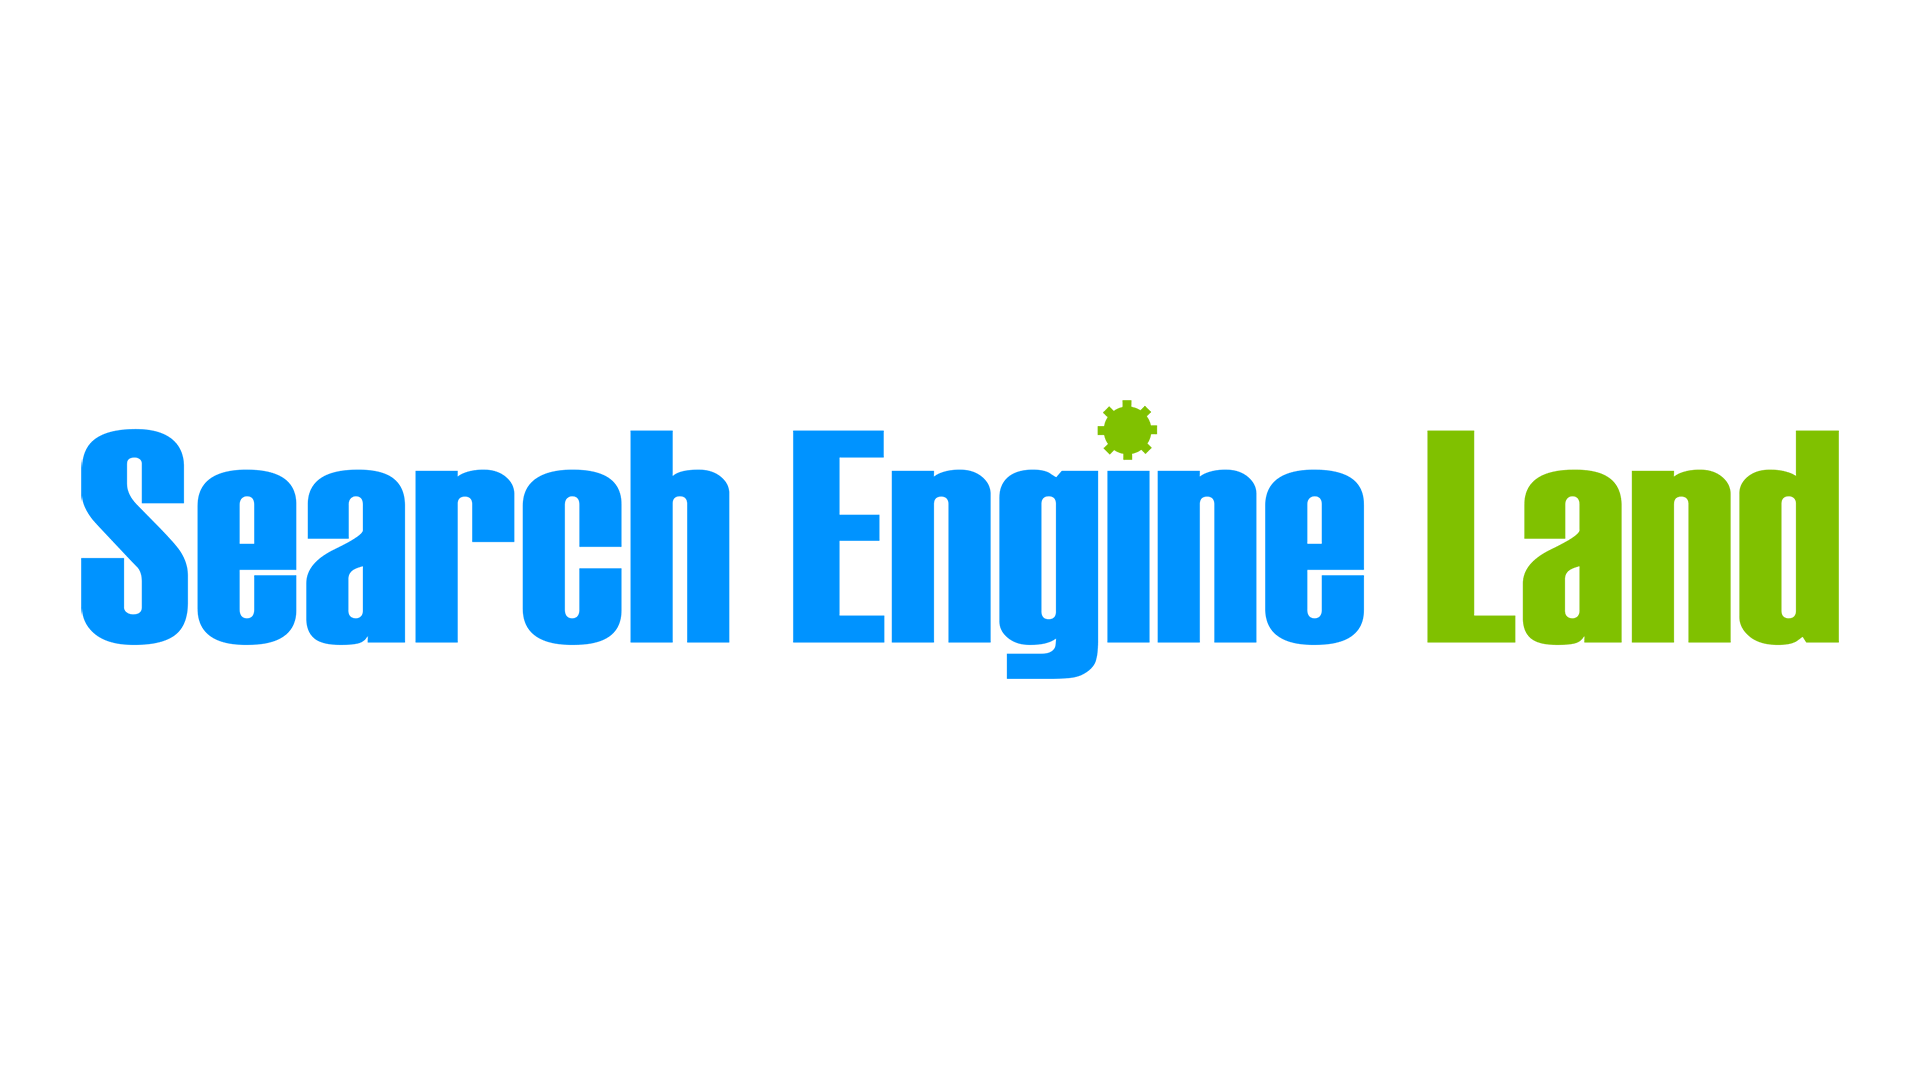 Search Engine Logo - This Is The Official Search Engine Land Logo - Search Engine Land